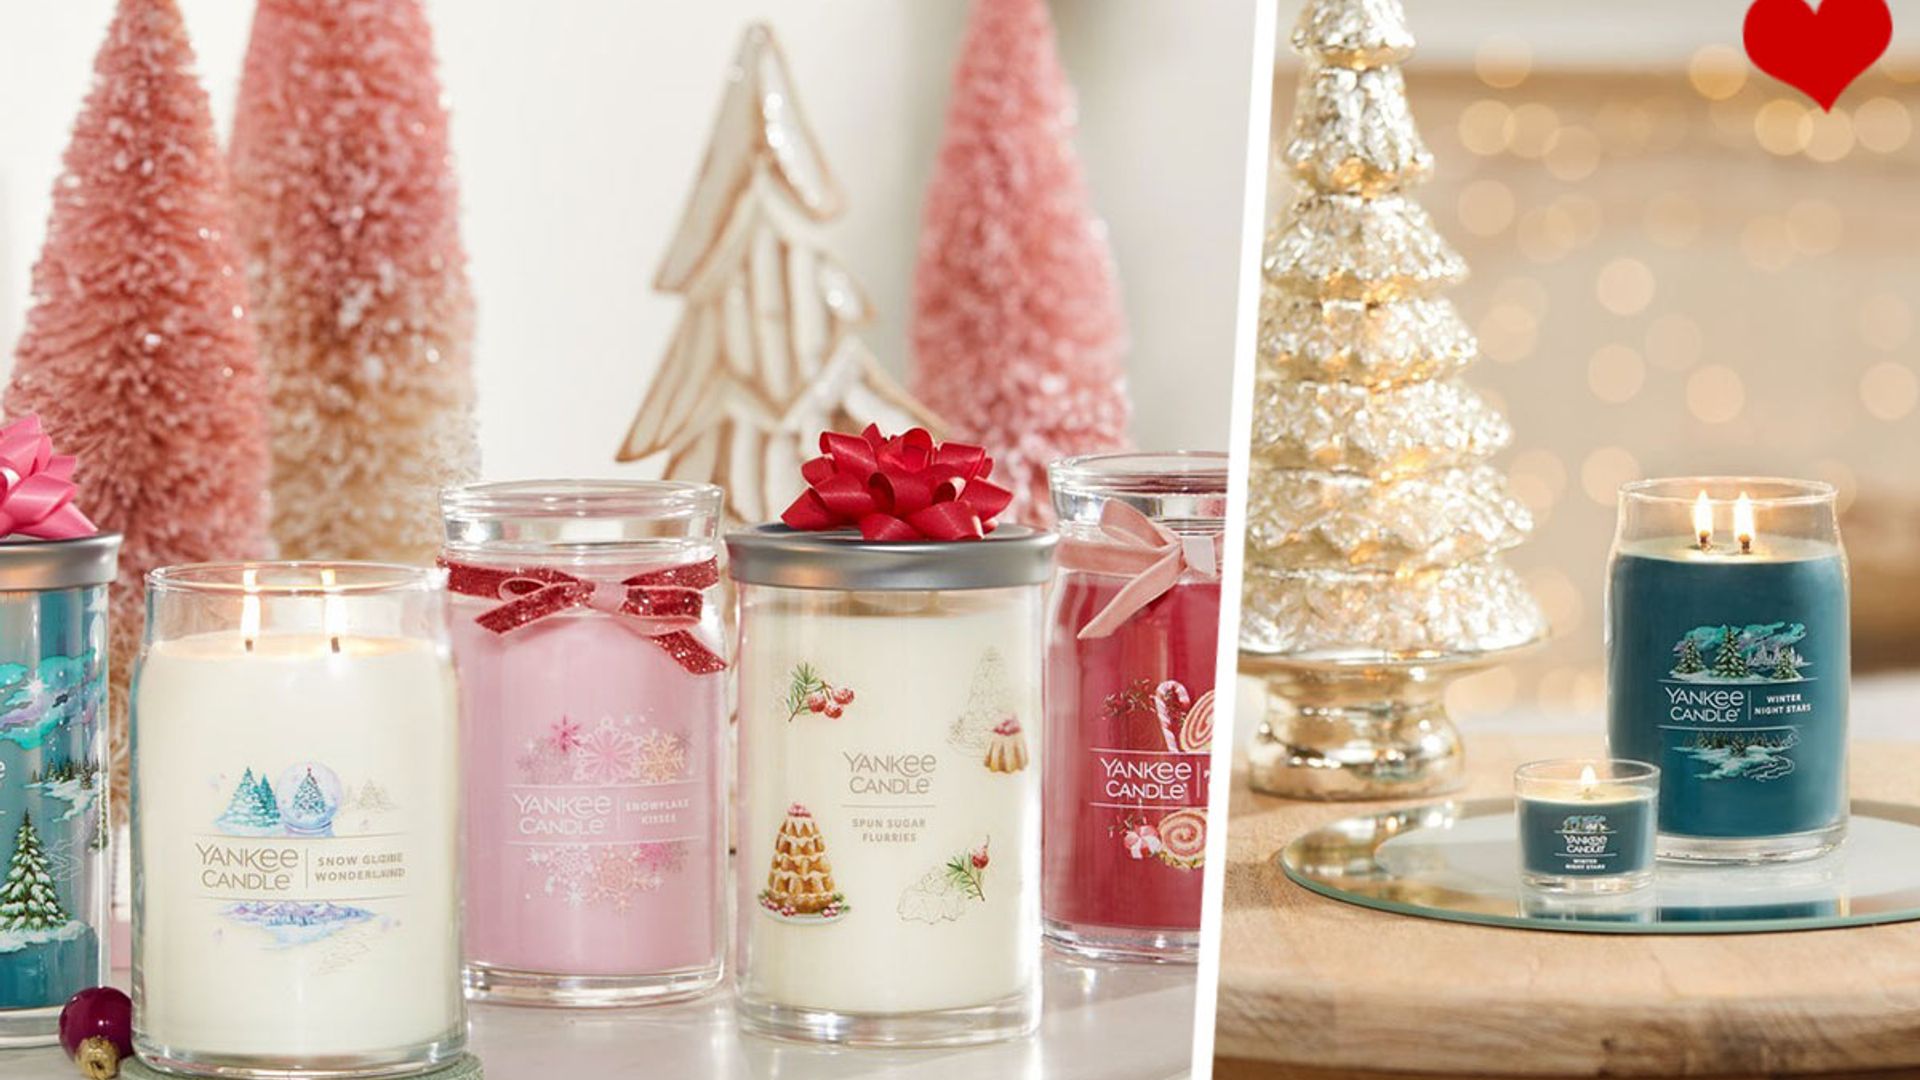 Yankee Candle Christmas Collection 2022